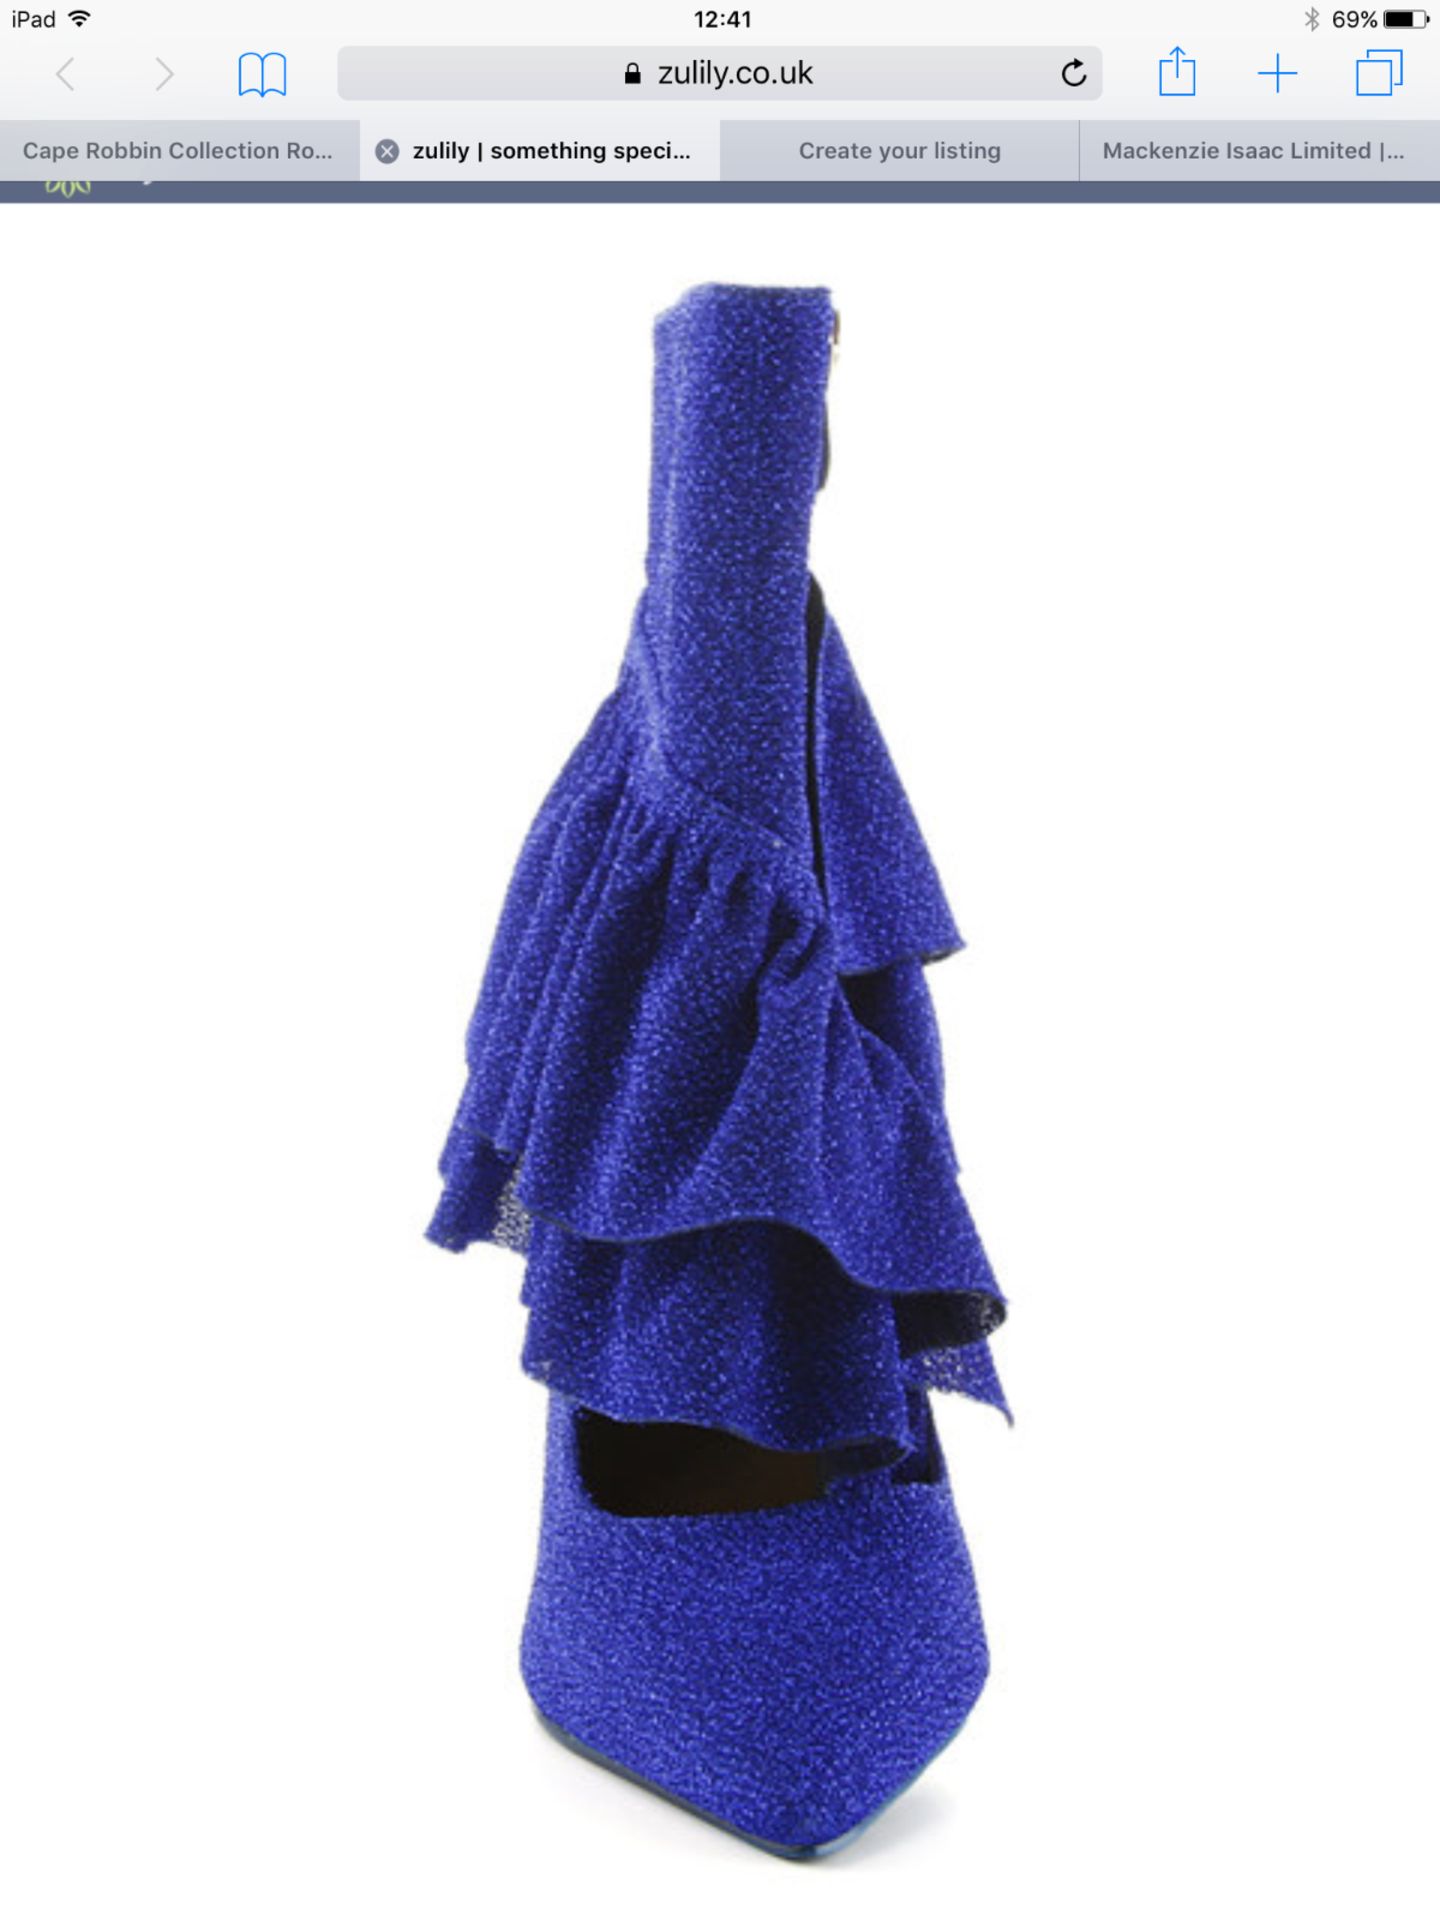 Cape Robbin Collection Royal Blue Beatrix Ruffle Boot, Size Eur 39, Rrp £59.99 (New With Box) [ - Image 2 of 7